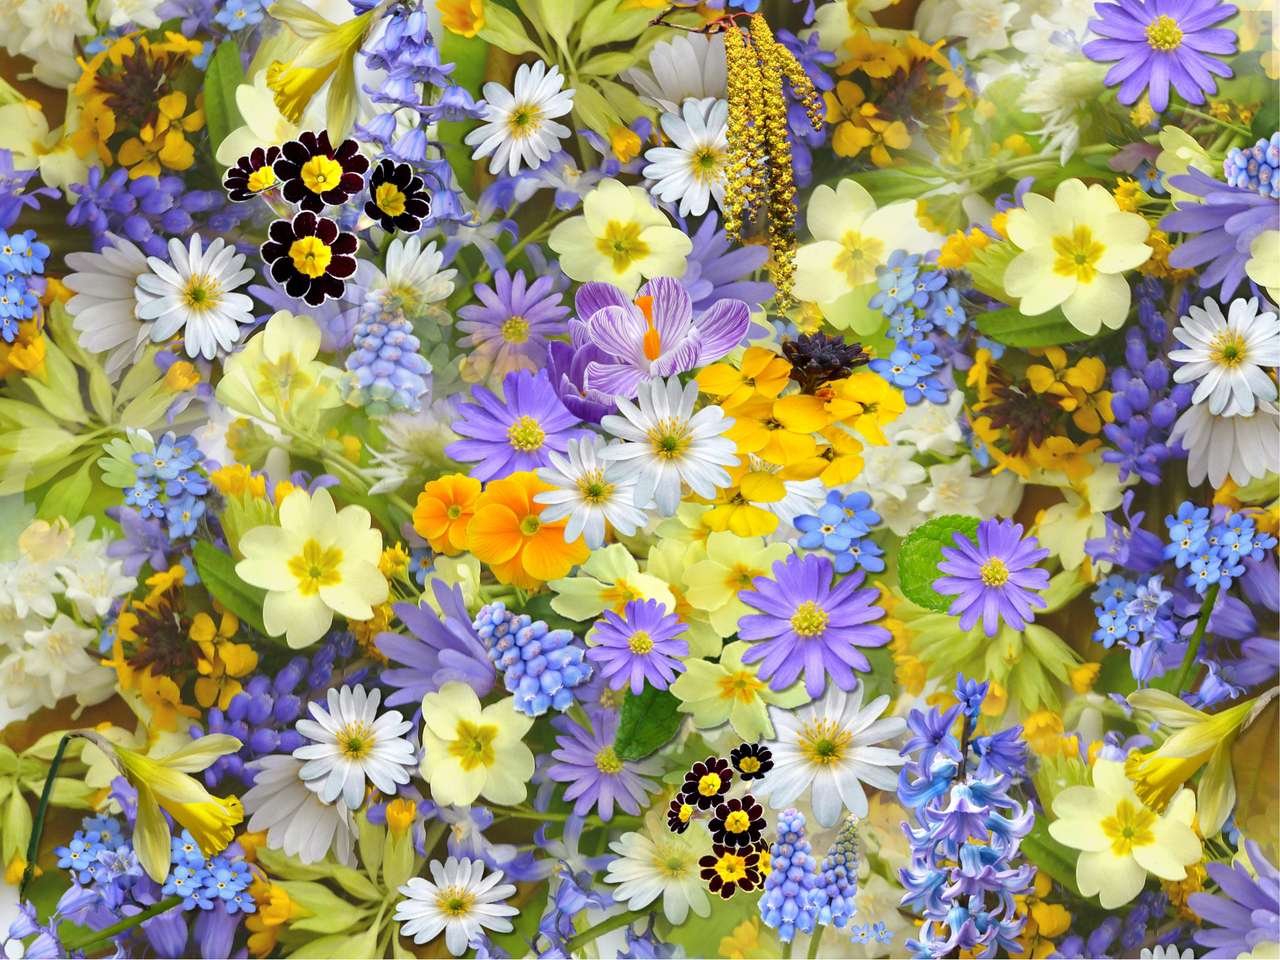 Flower Field puzzle online from photo